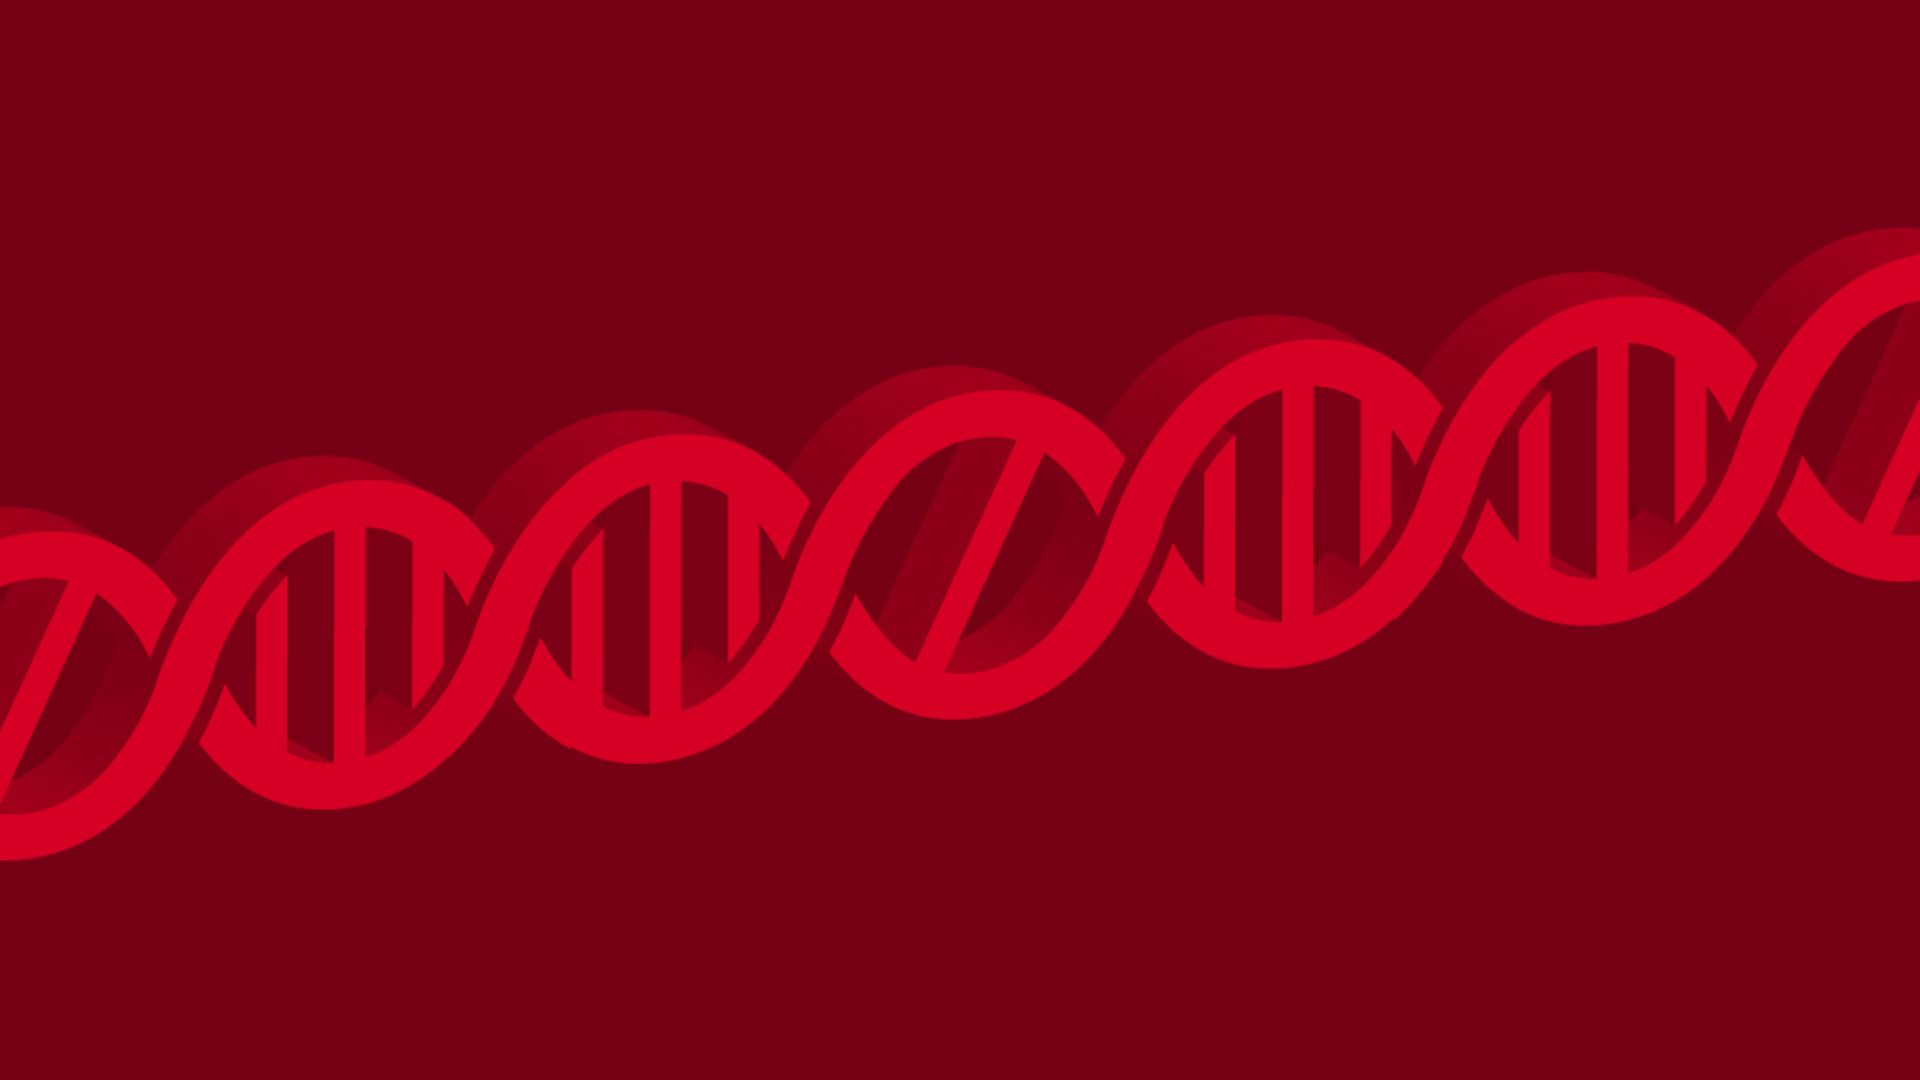 Illustration of a DNA strand with the middle link having a no-go sign